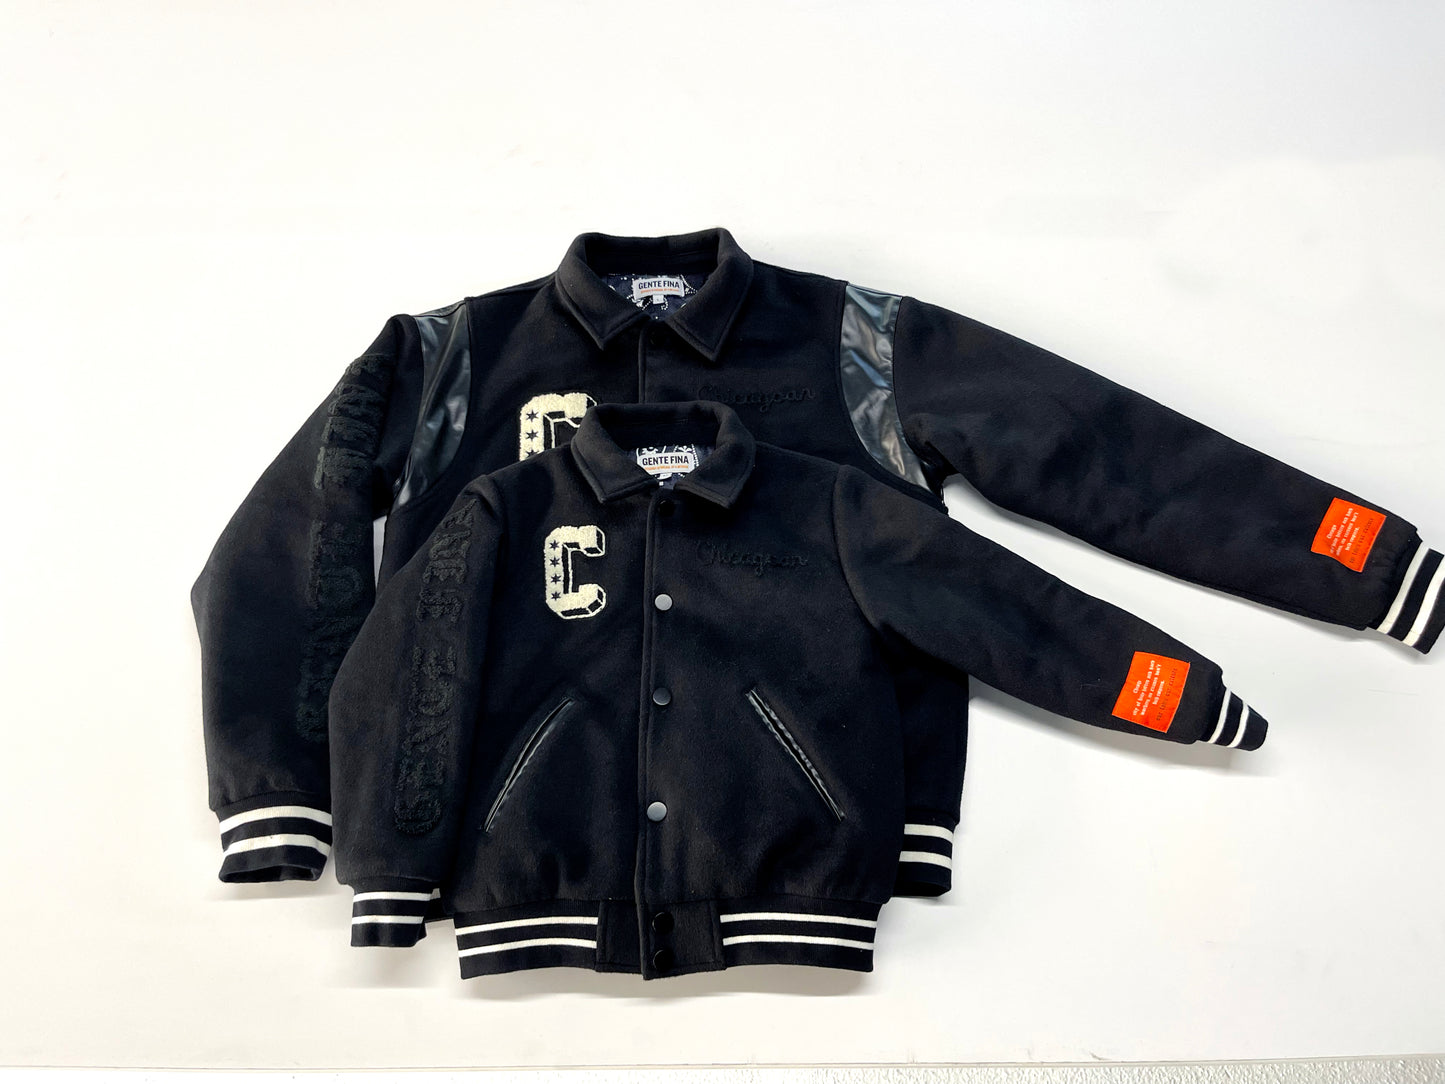 ADULT CHICAGOAN VARSITY JACKET - BLACKED OUT EDITION